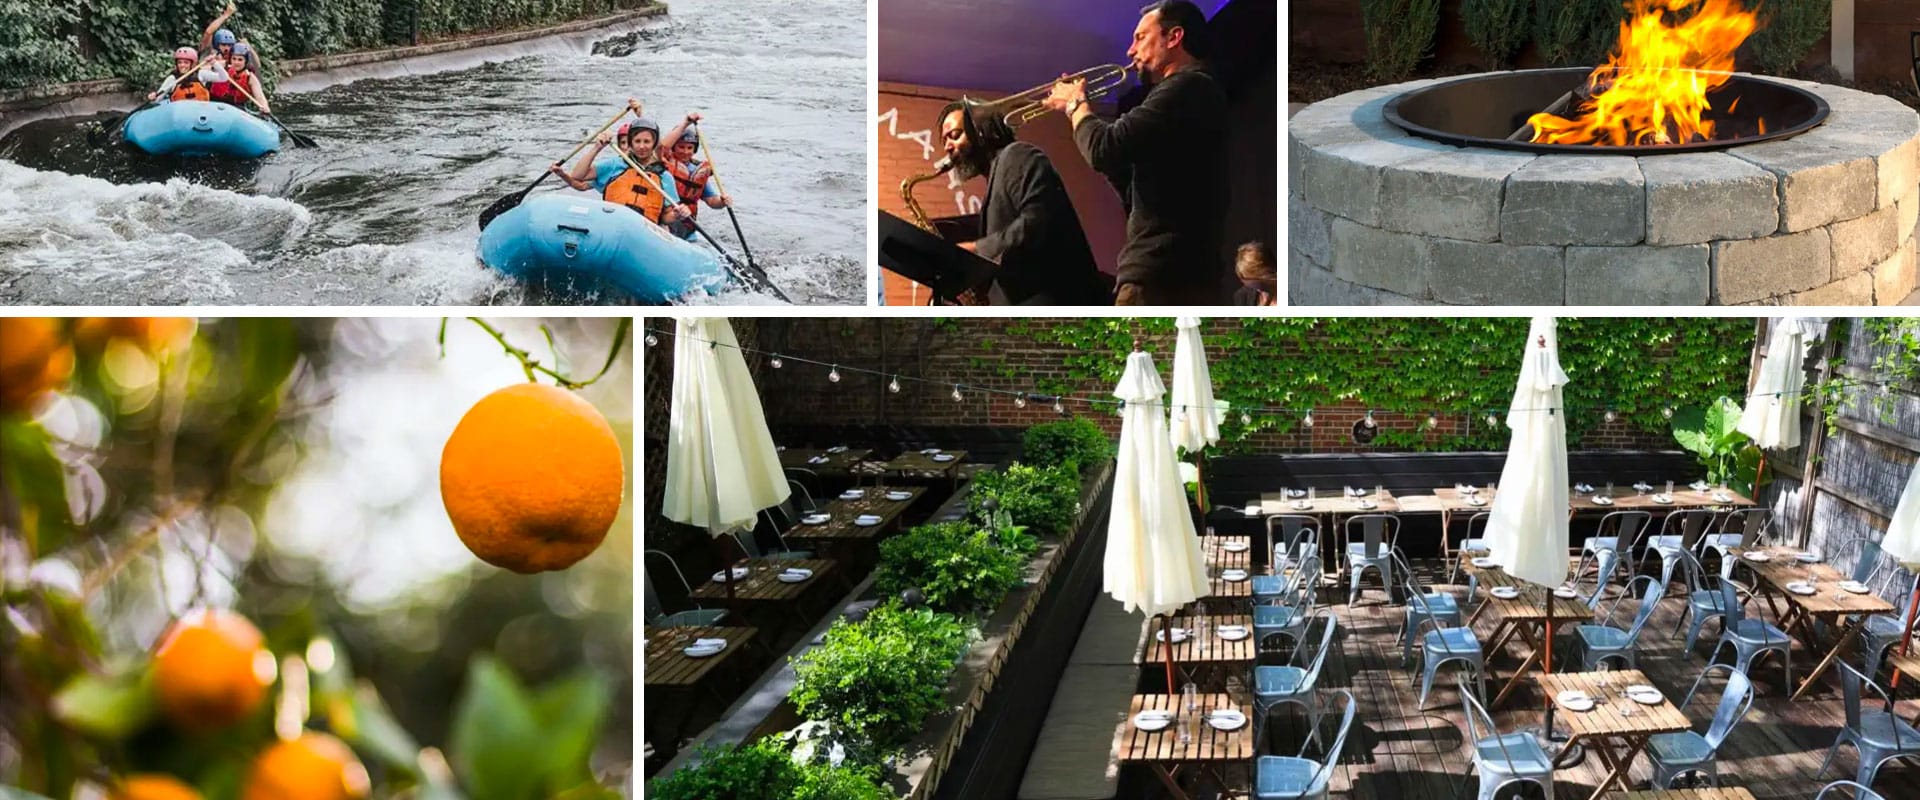 collage of courtyard, fireplace, rafting on river, jazz club and fruit.